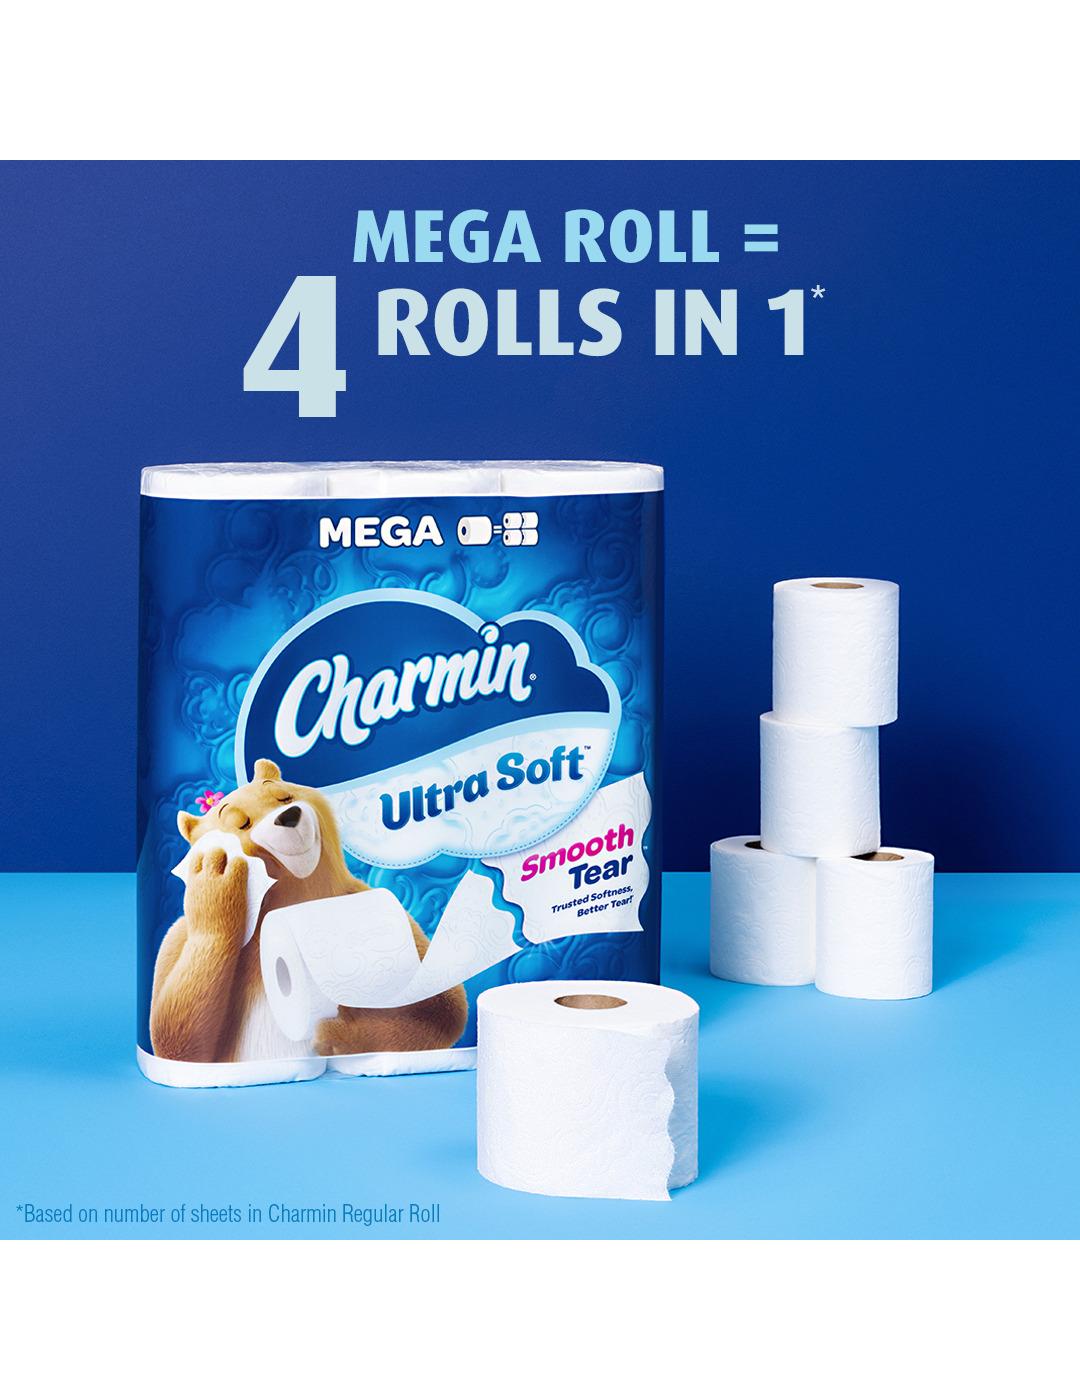 Charmin Ultra Soft Toilet Paper; image 8 of 20